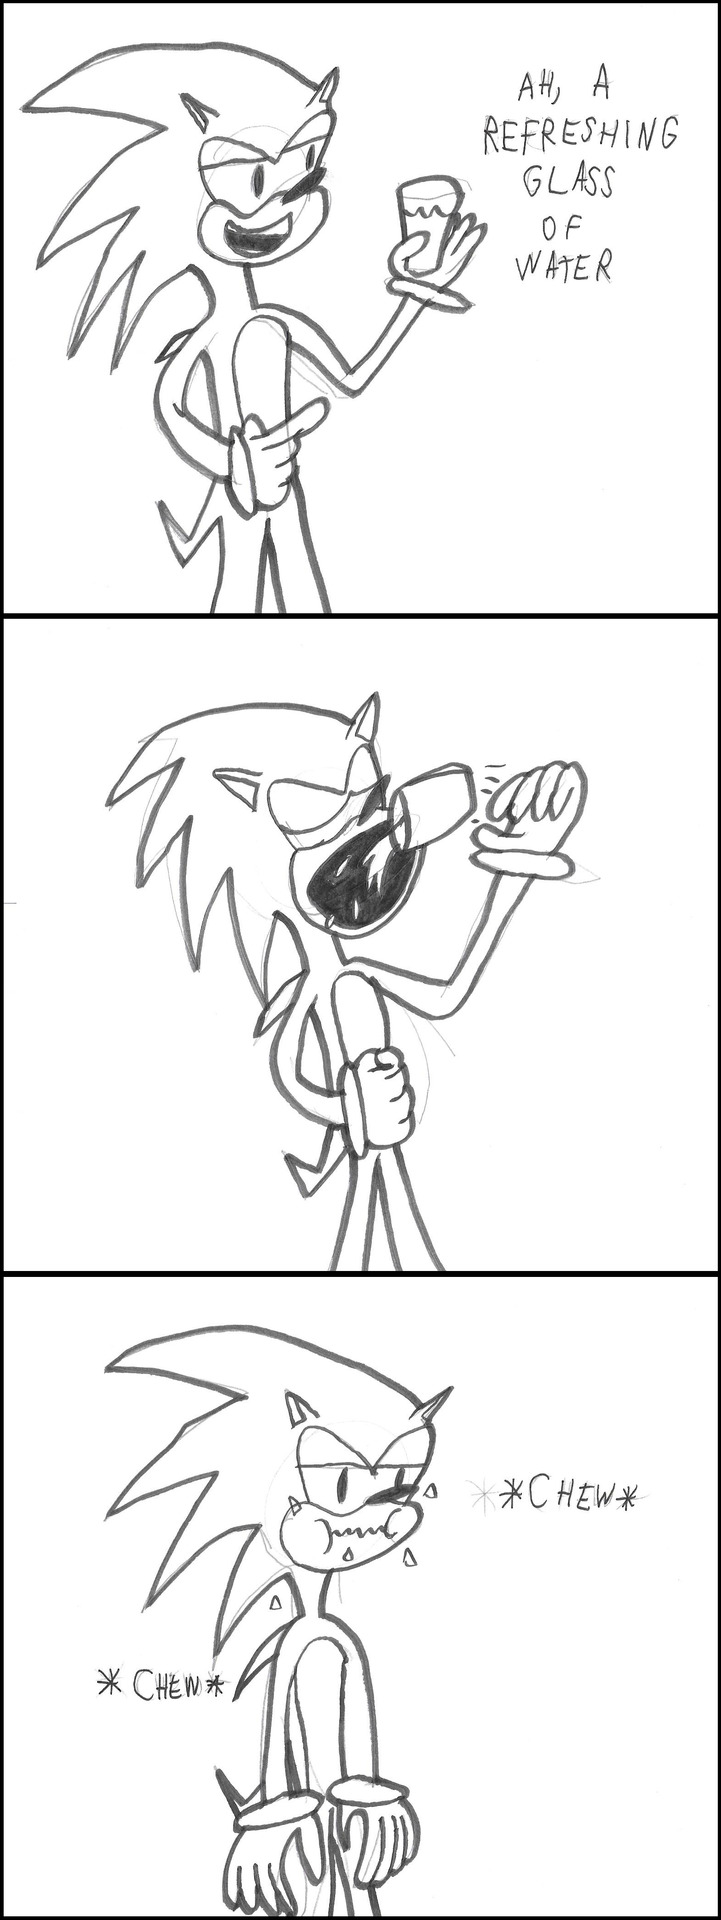 Sonic is holding a glass of water. Ah, he says, time to enjoy a refreshing glass of water! Sonic throws the entire glass into his mouth and begins chewing it. The end.